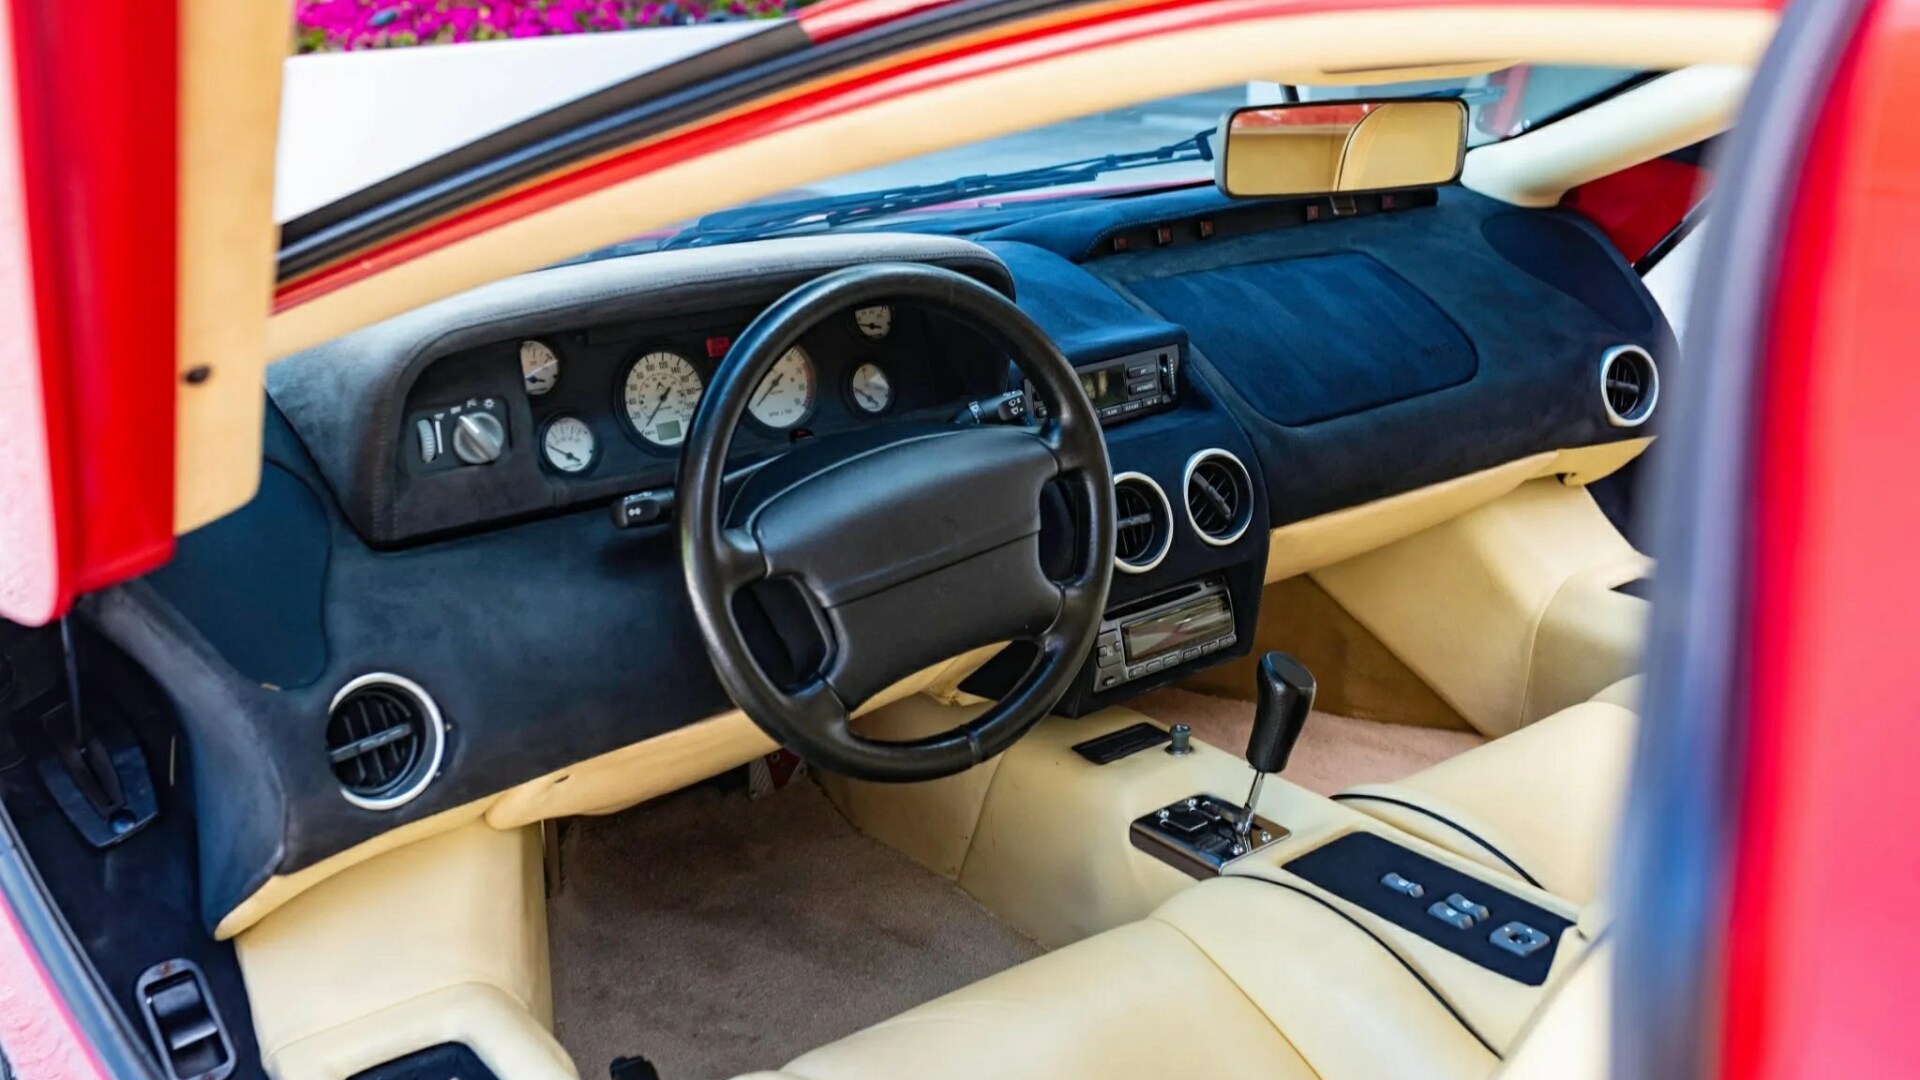 The Interior, Steering, Dashboard, And Central Console Of A (Credits Bring A Trailer)